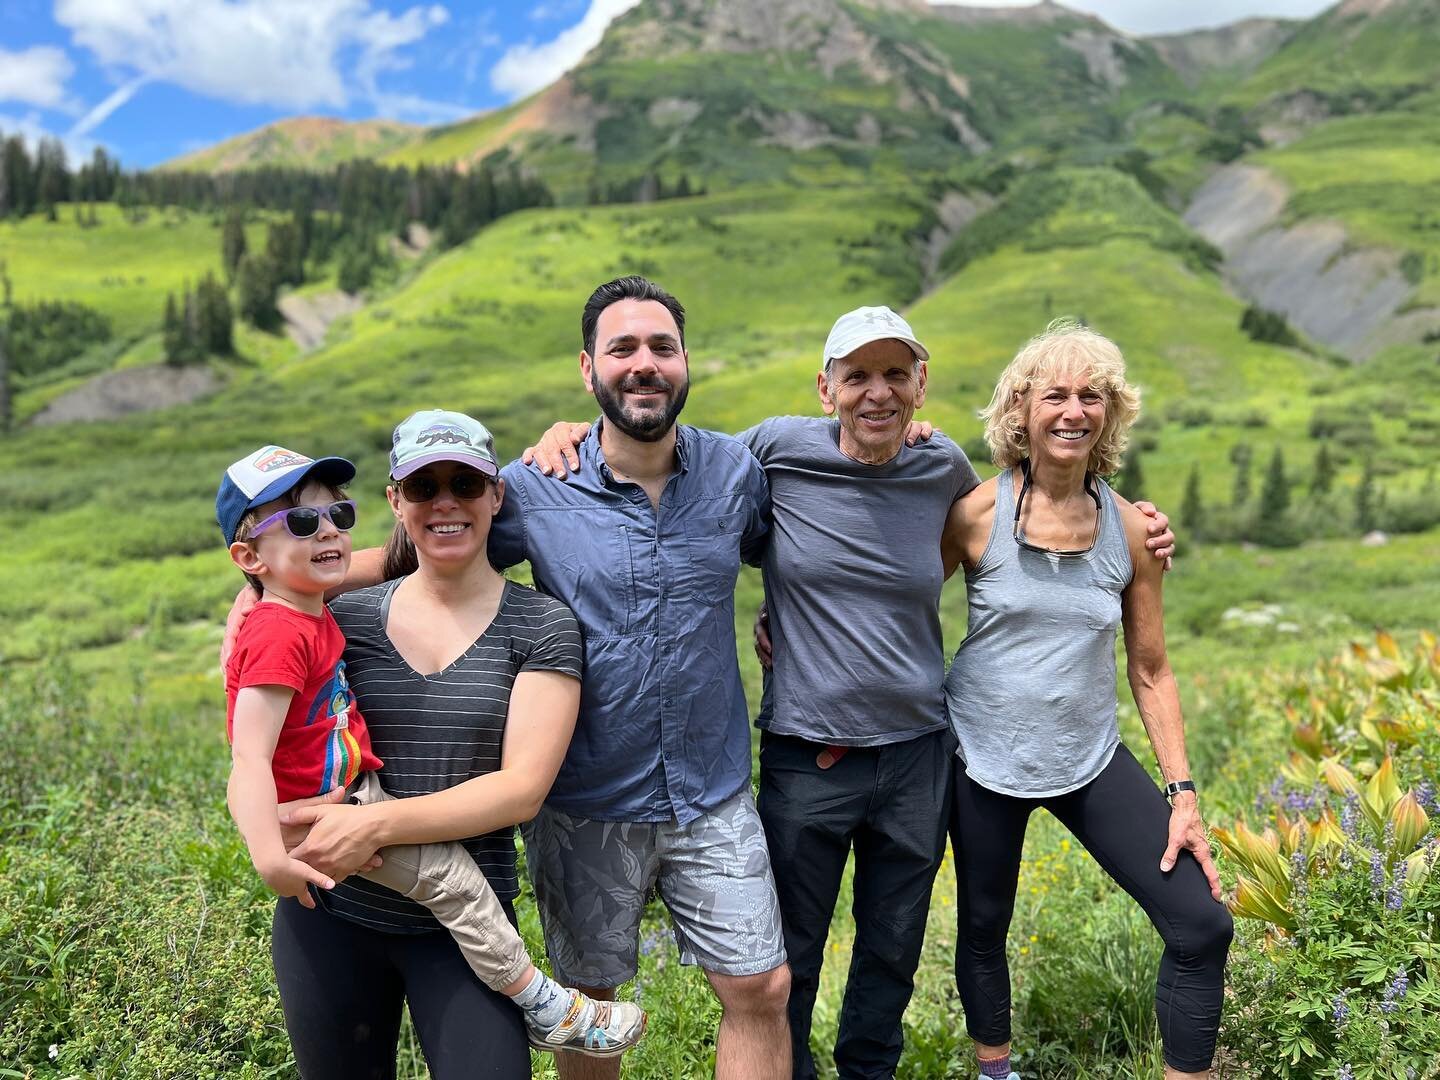 Our first family hike in Crested  Butte this trip at Rustler&rsquo;s Gulch with our amazing  4- year- old hiker, Max. Can&rsquo;t beat these views.